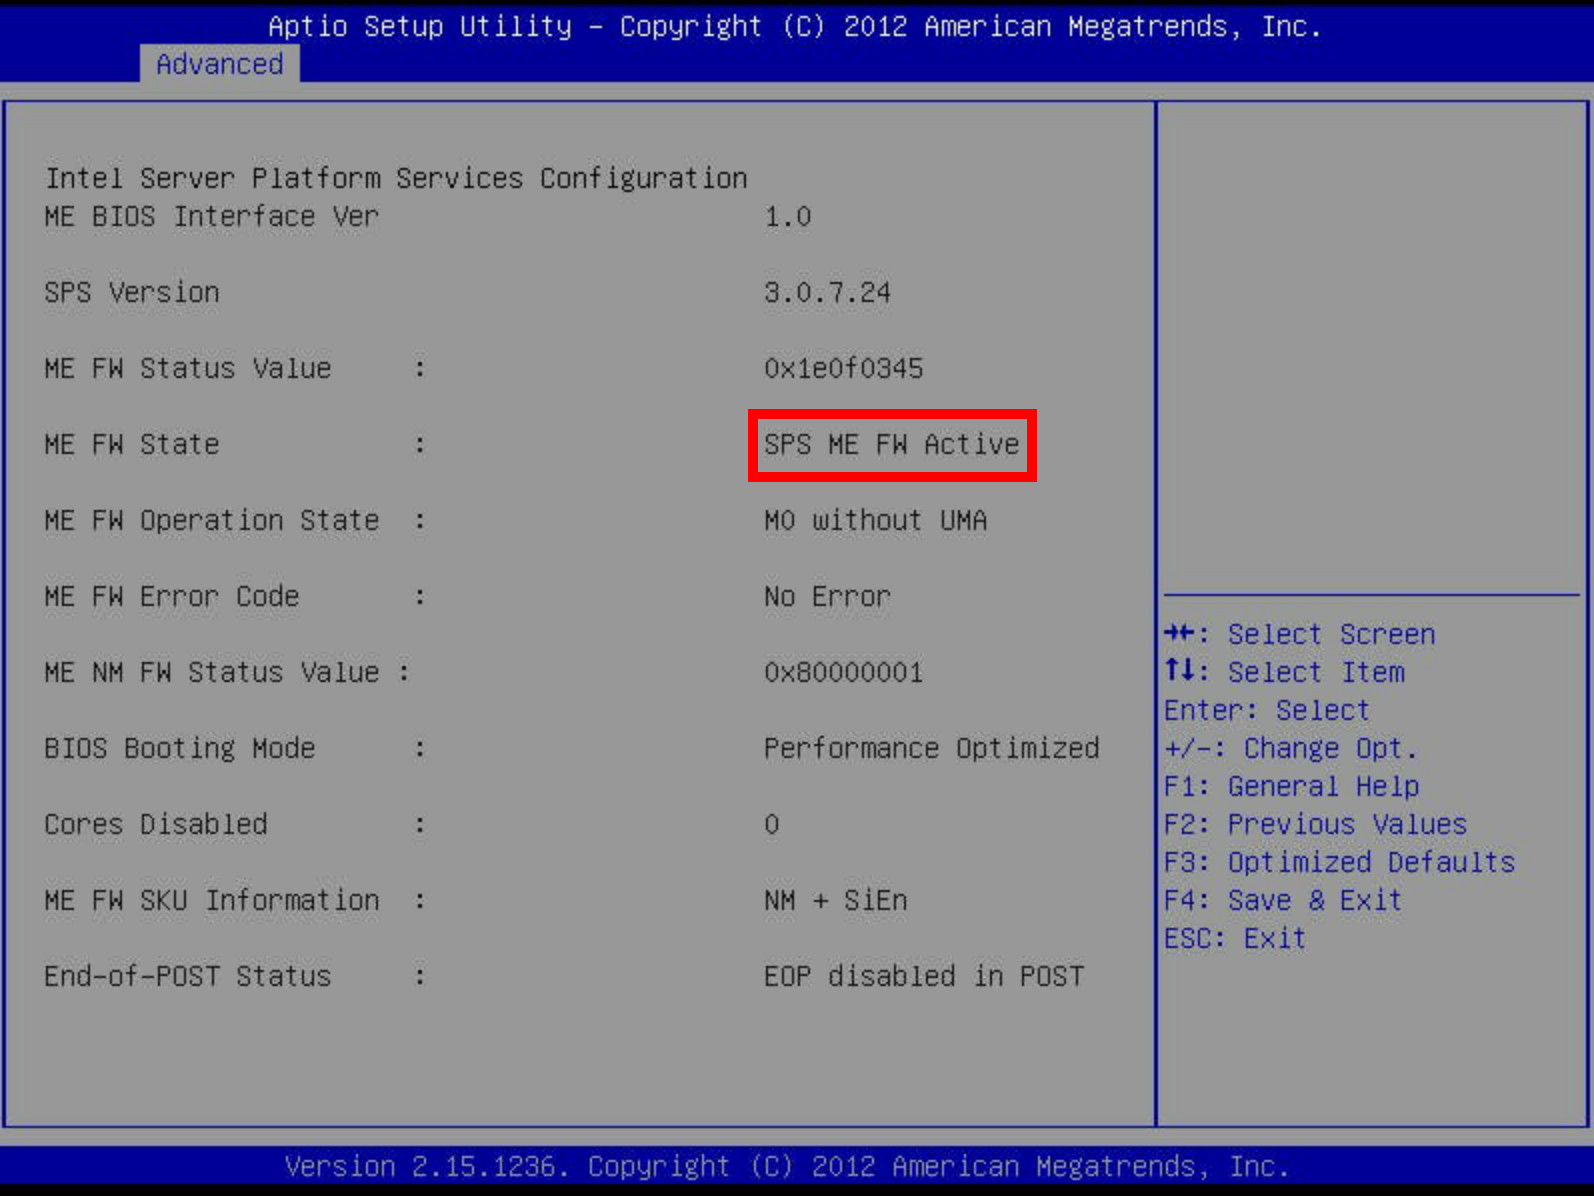 Screenshot of the Supermicro BIOS, showing that the Management Engine is operating normally.